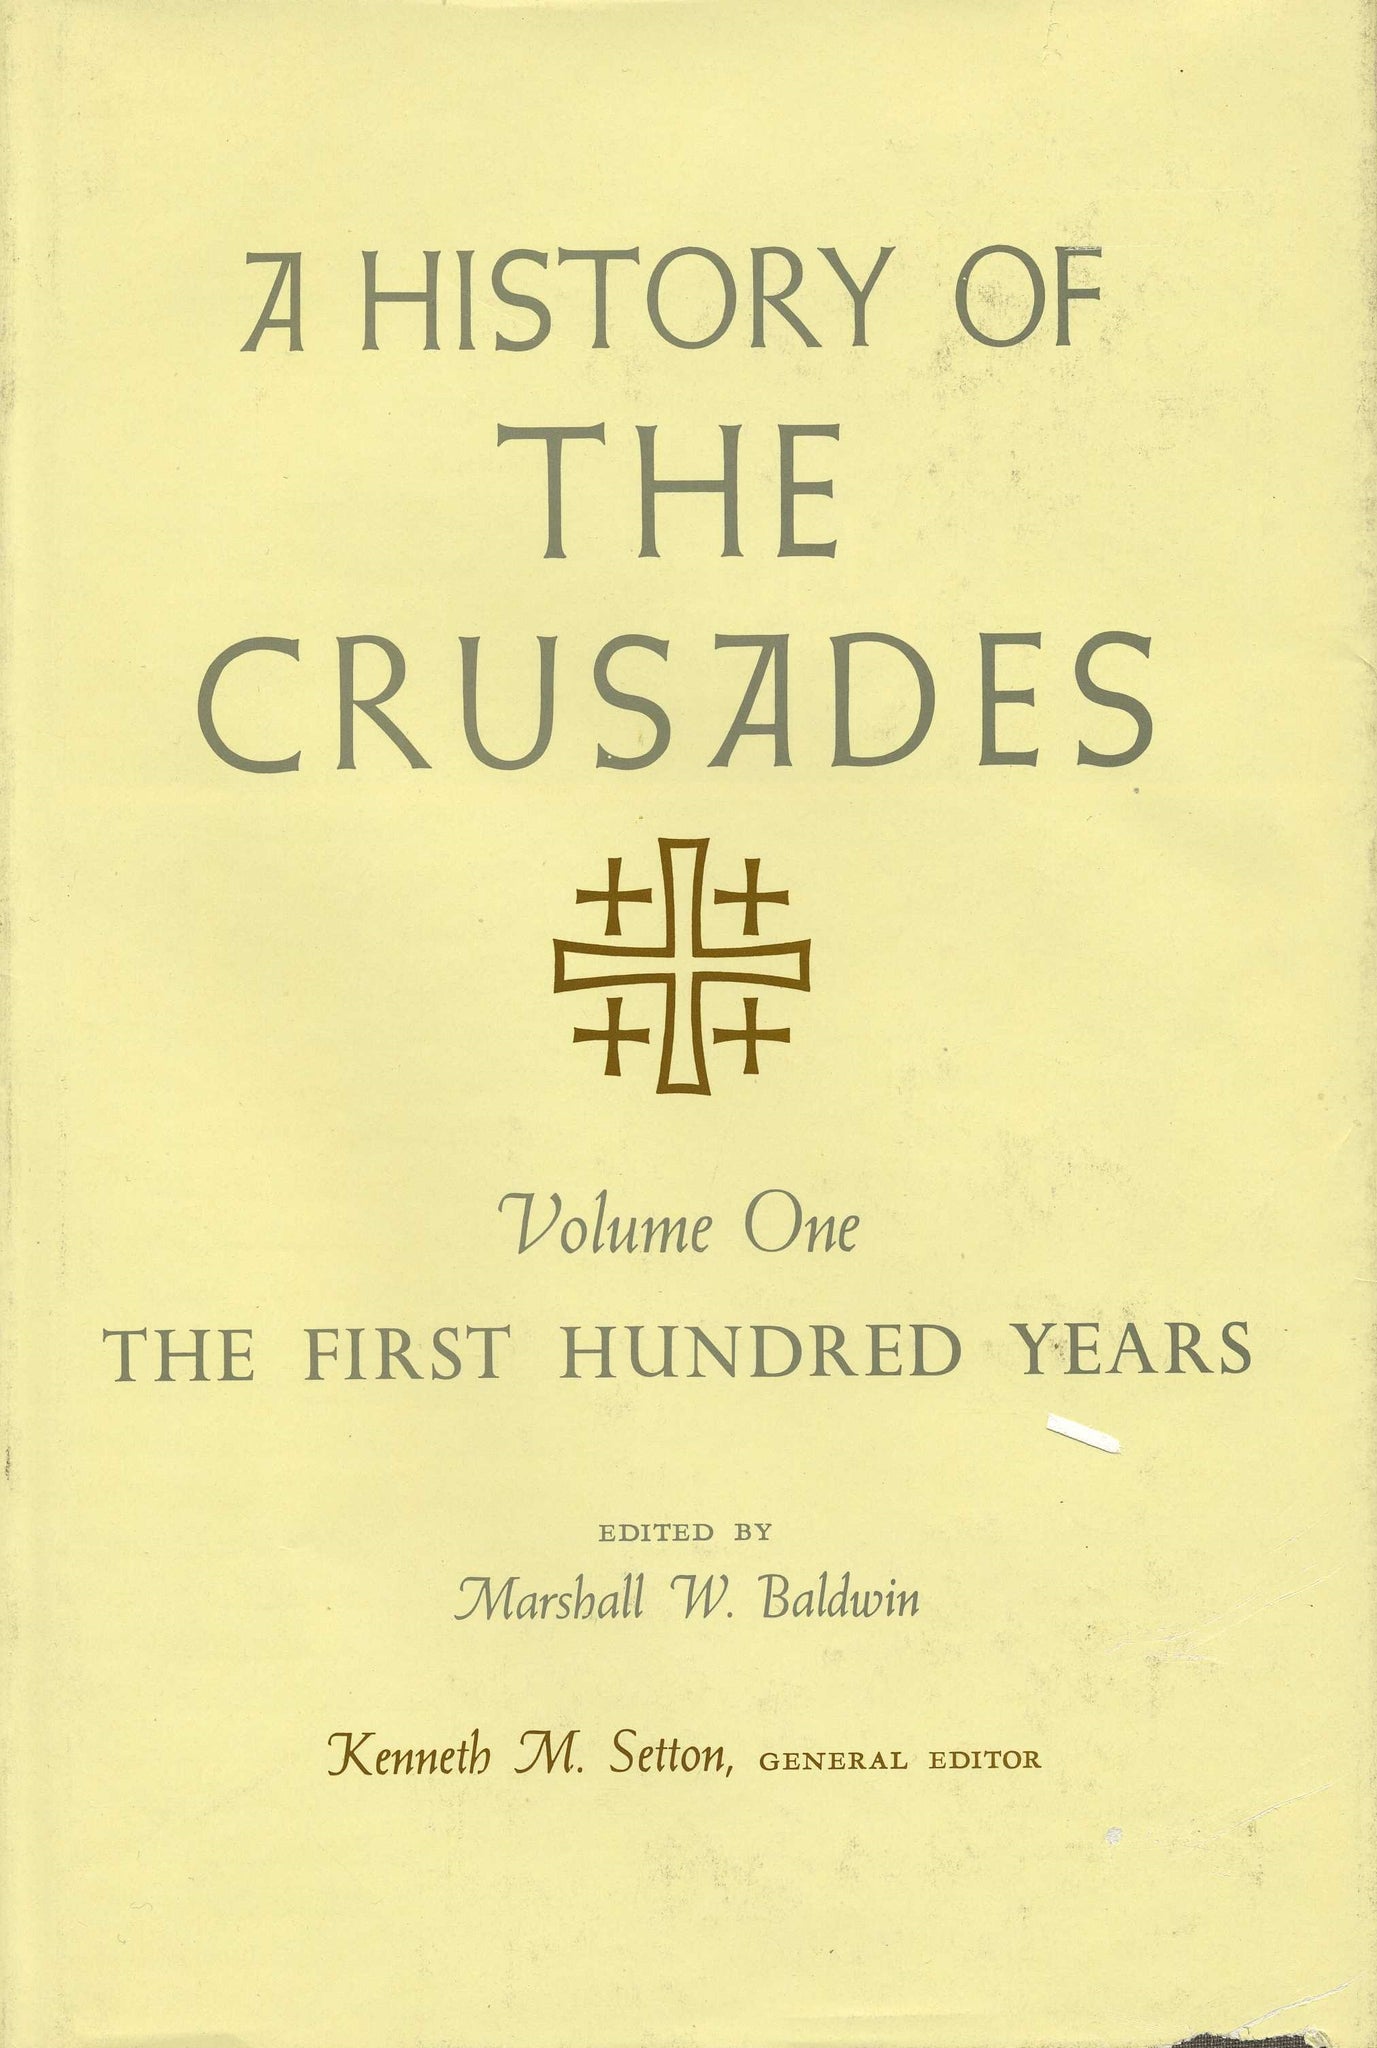 HISTORY OF THE CRUSADES, A